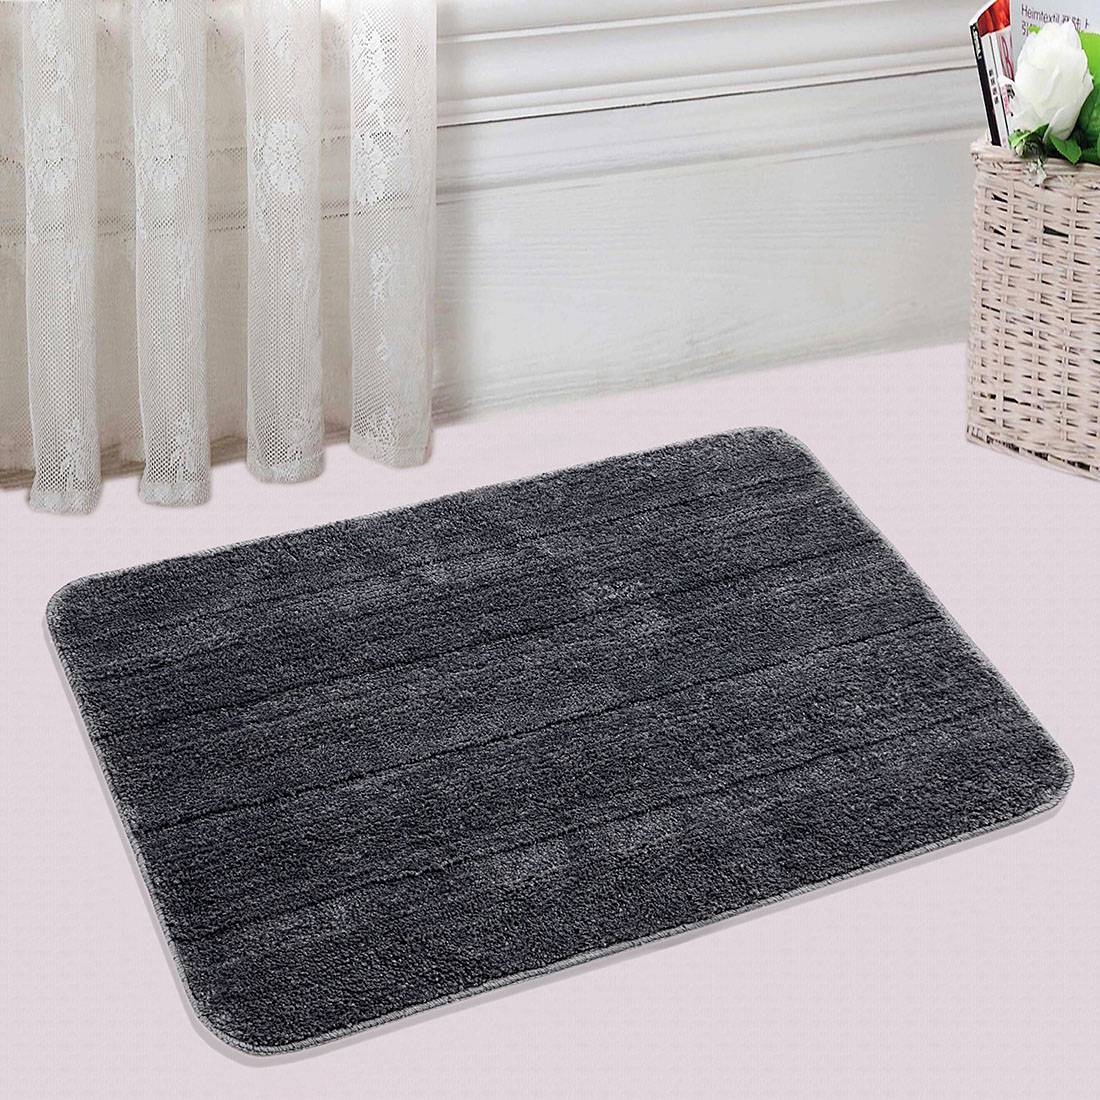 NJSBYL Bath Rug Mats Chenille Doormat Water Absorbent Machine Washable/Dry 26 x 36 Gray Area Rugs for Bathroom Pet Dog Cat 